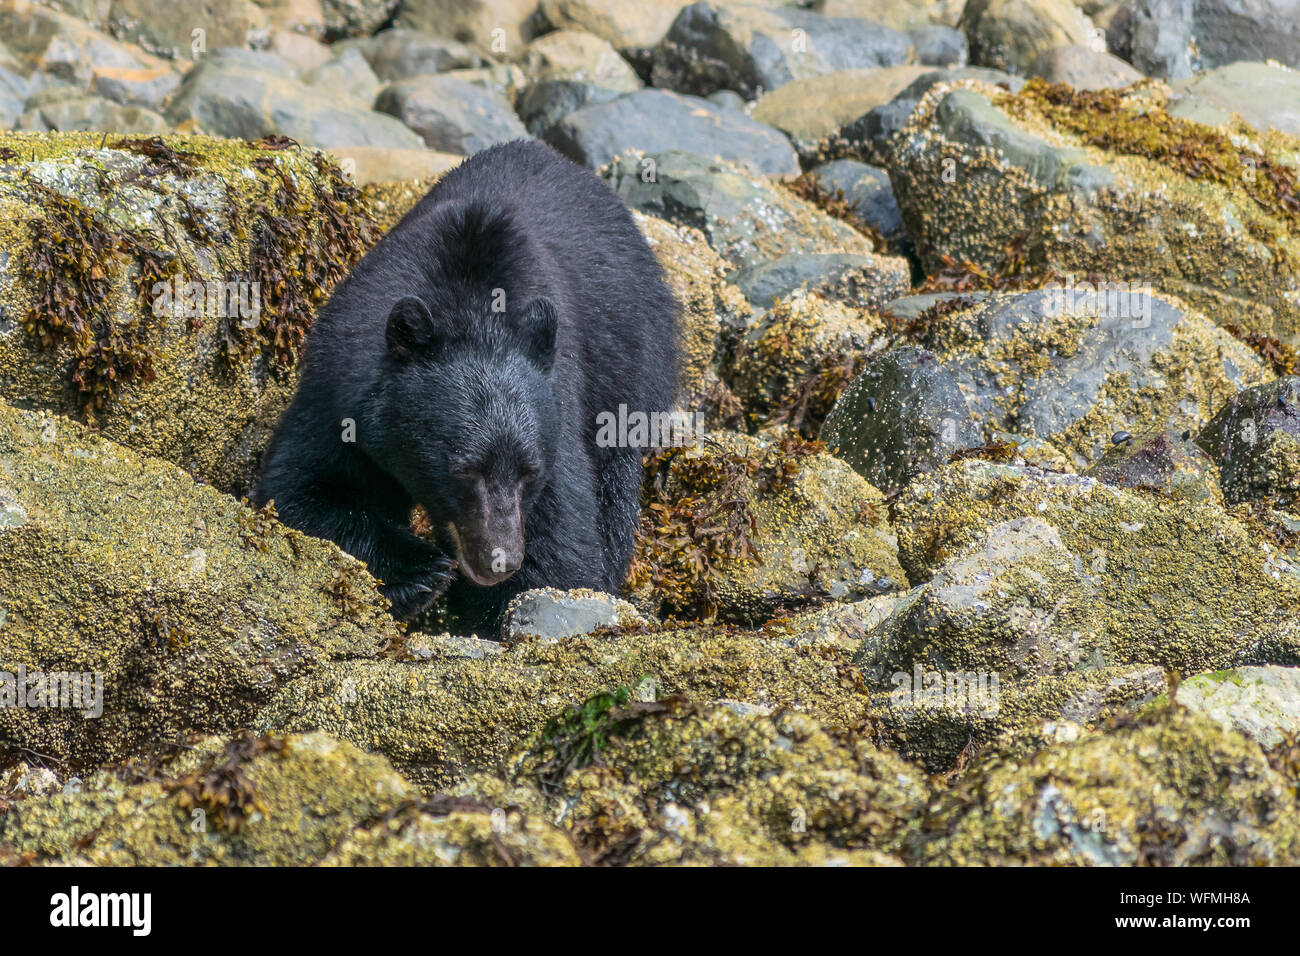 Vancouver Island, British Columbia, is home to a large thriving population of indigenous black bears that comb coastal beaches for food. Stock Photo